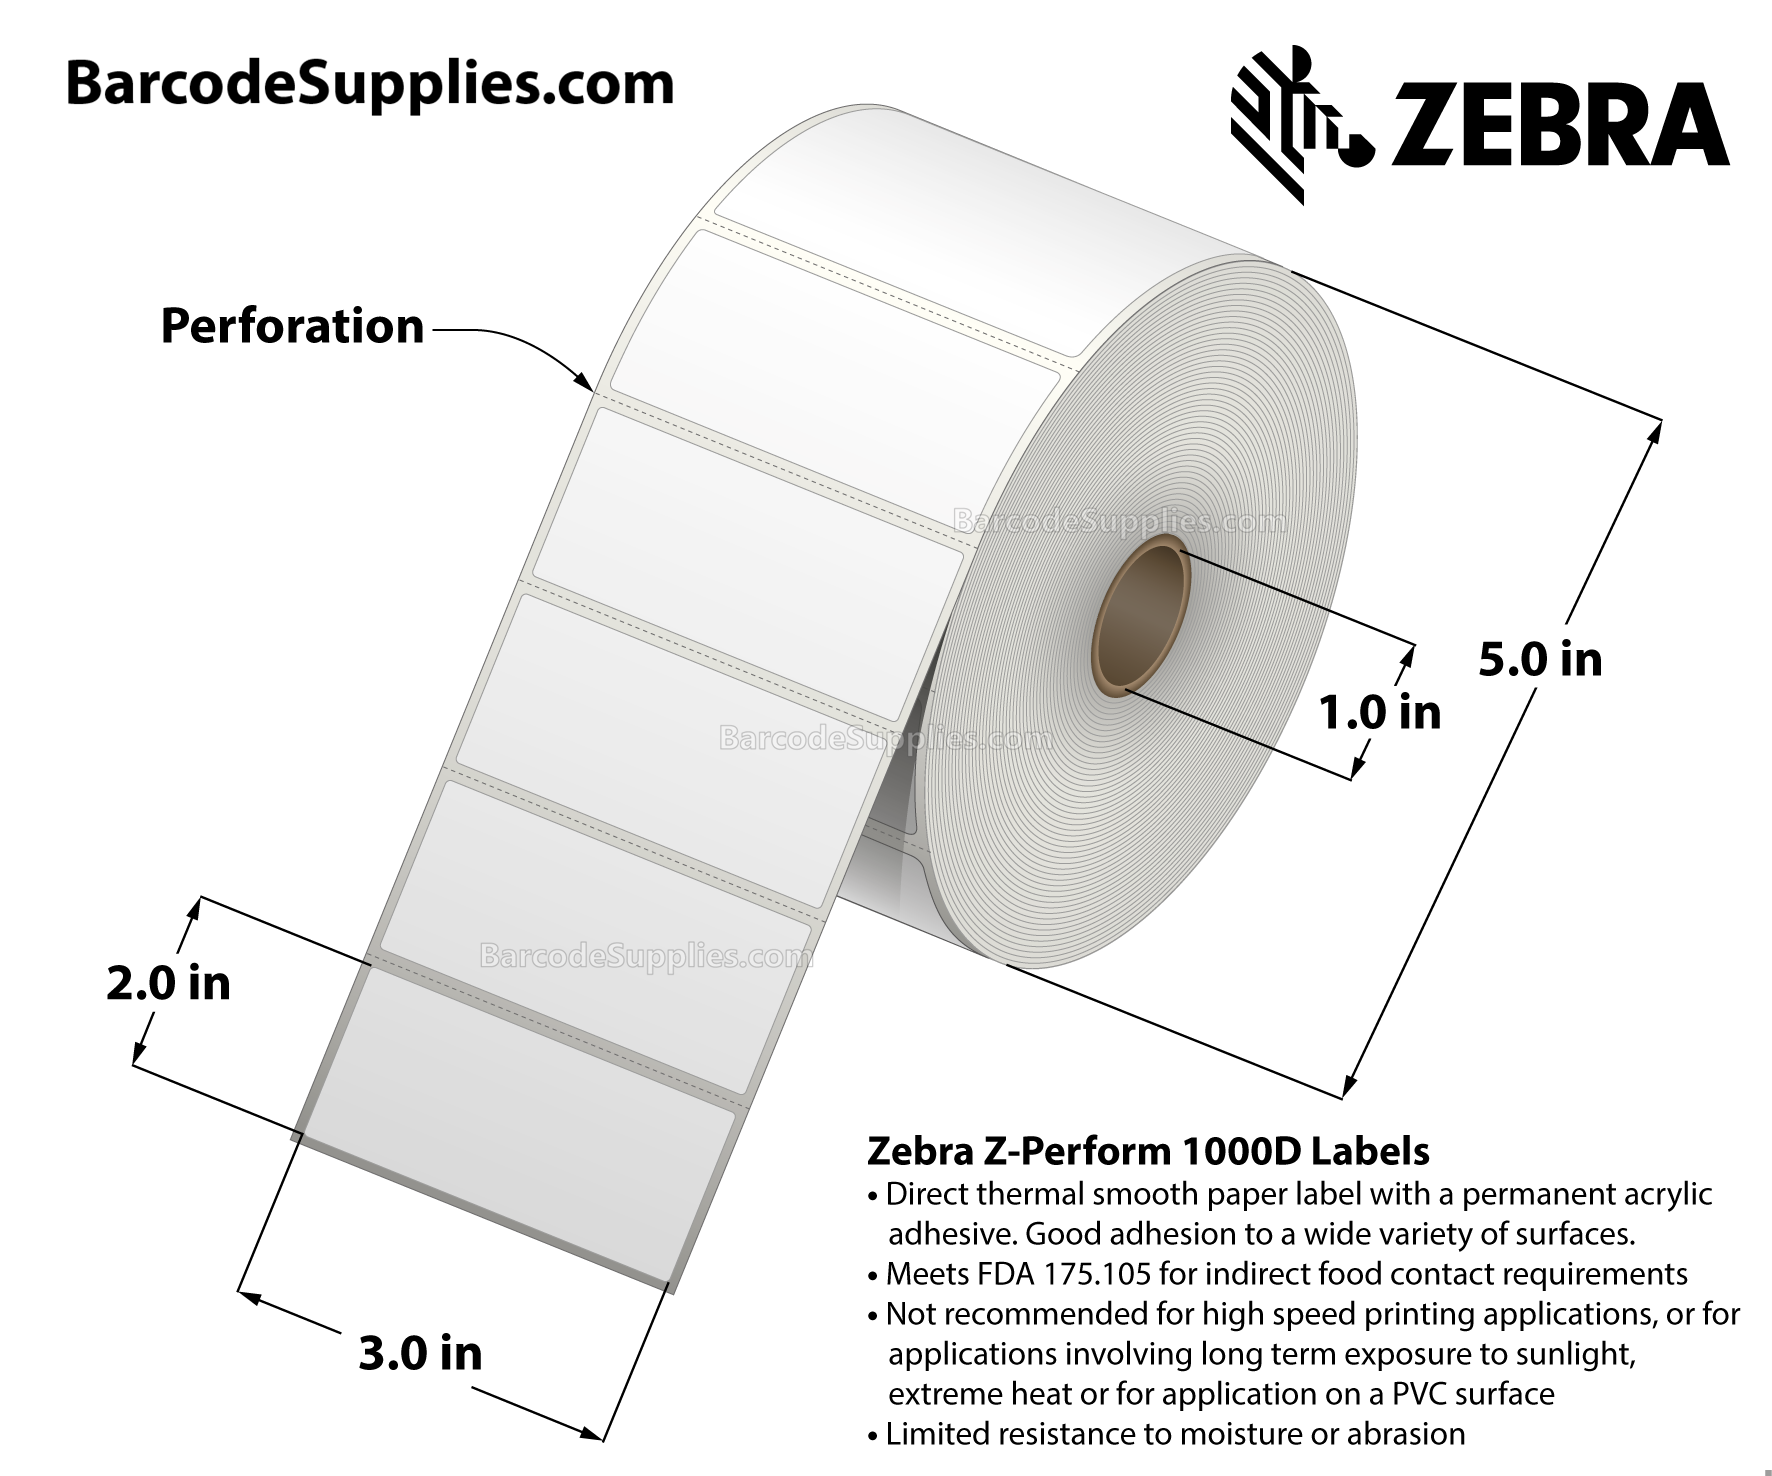 3 x 2 Direct Thermal White Z-Perform 1000D Labels With Permanent Adhesive - Perforated - 1240 Labels Per Roll - Carton Of 6 Rolls - 7440 Labels Total - MPN: 10026378